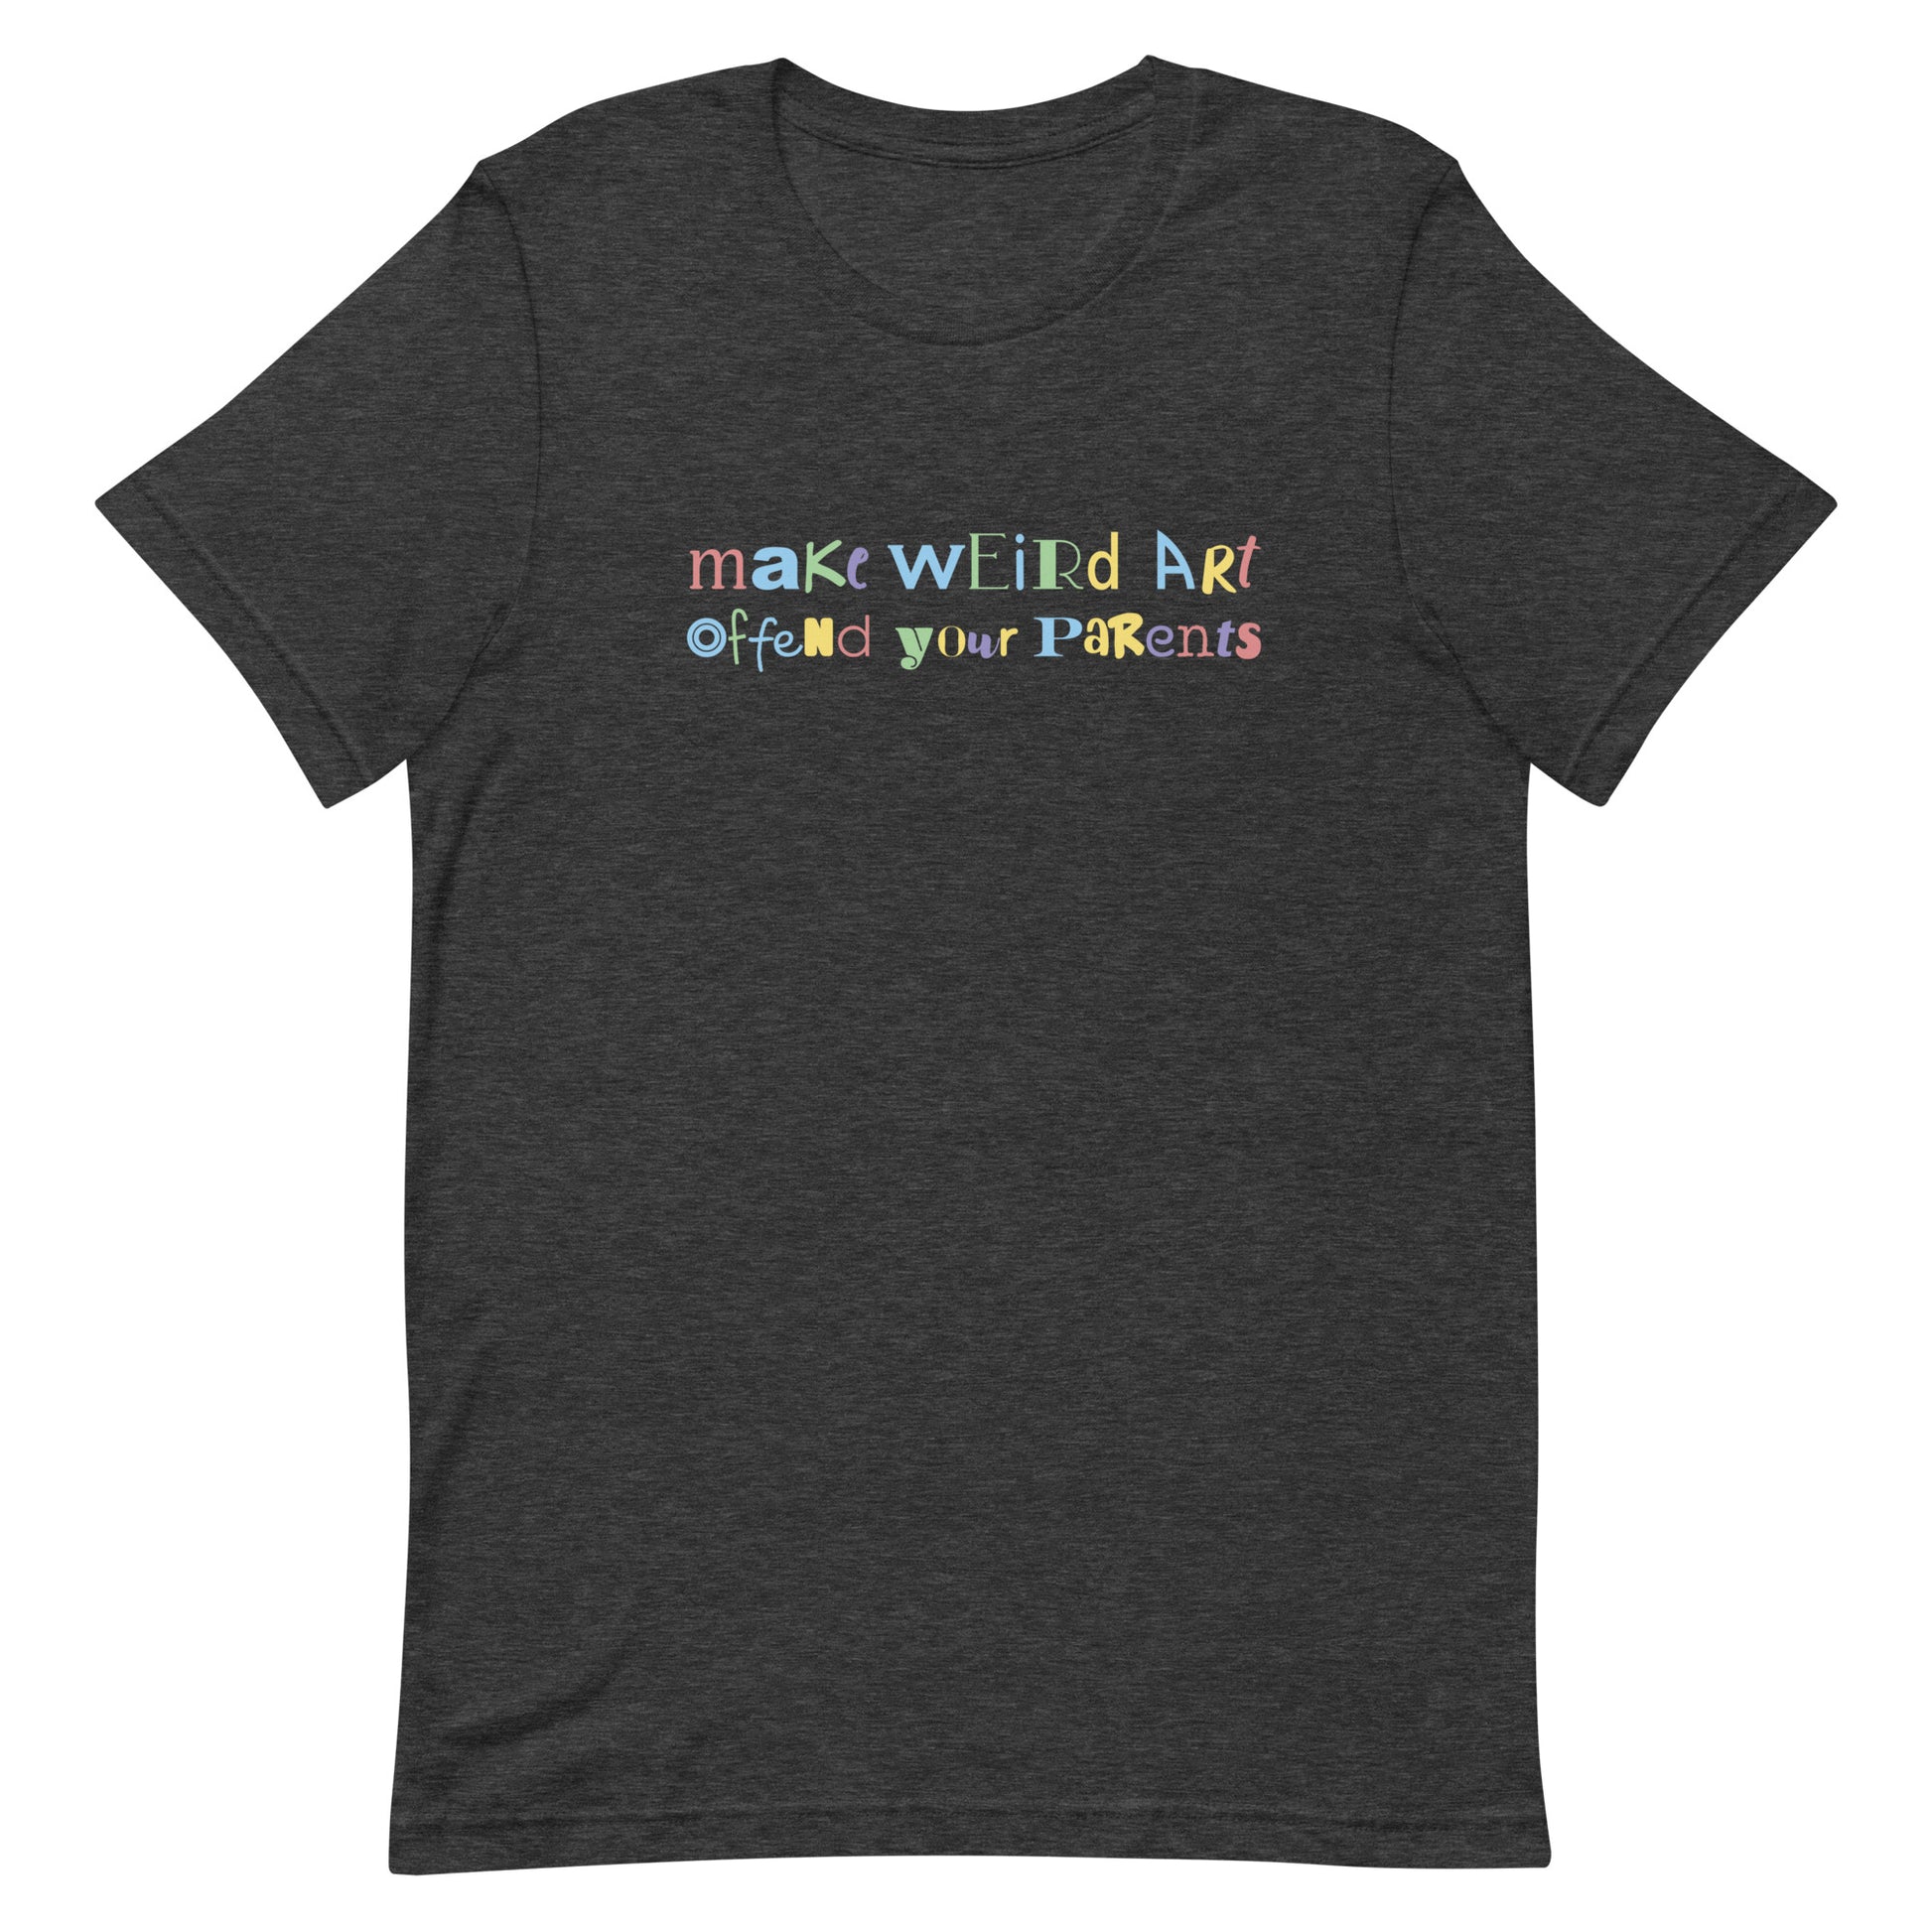 A dark grey crewneck t-shirt with text that reads "make weird art, offend your parents". The text is a scrambled collection of different colors and fonts.